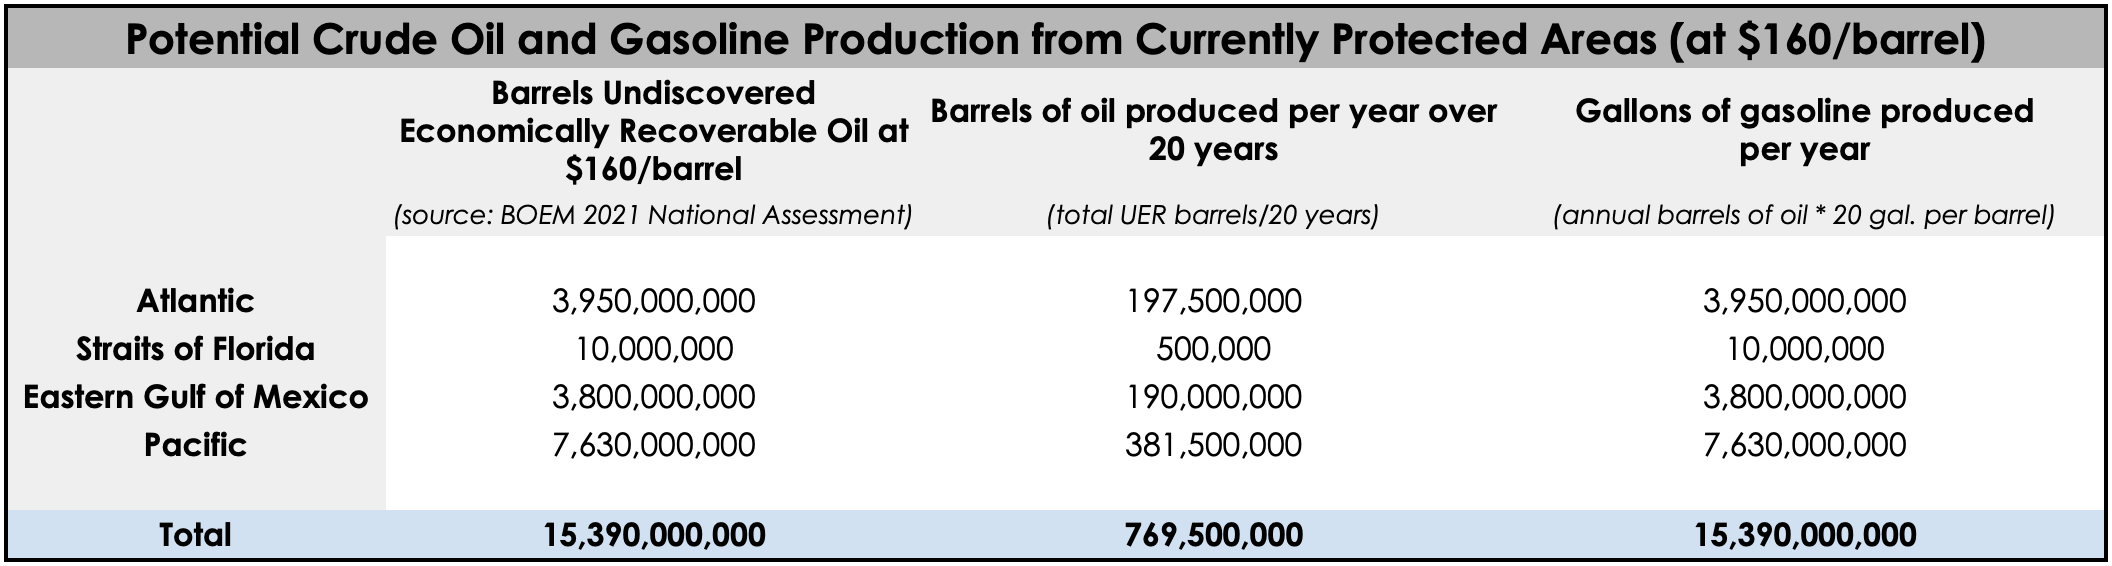 Table showing potential gasoline production from currently-protected offshore areas at $160 per barrel.